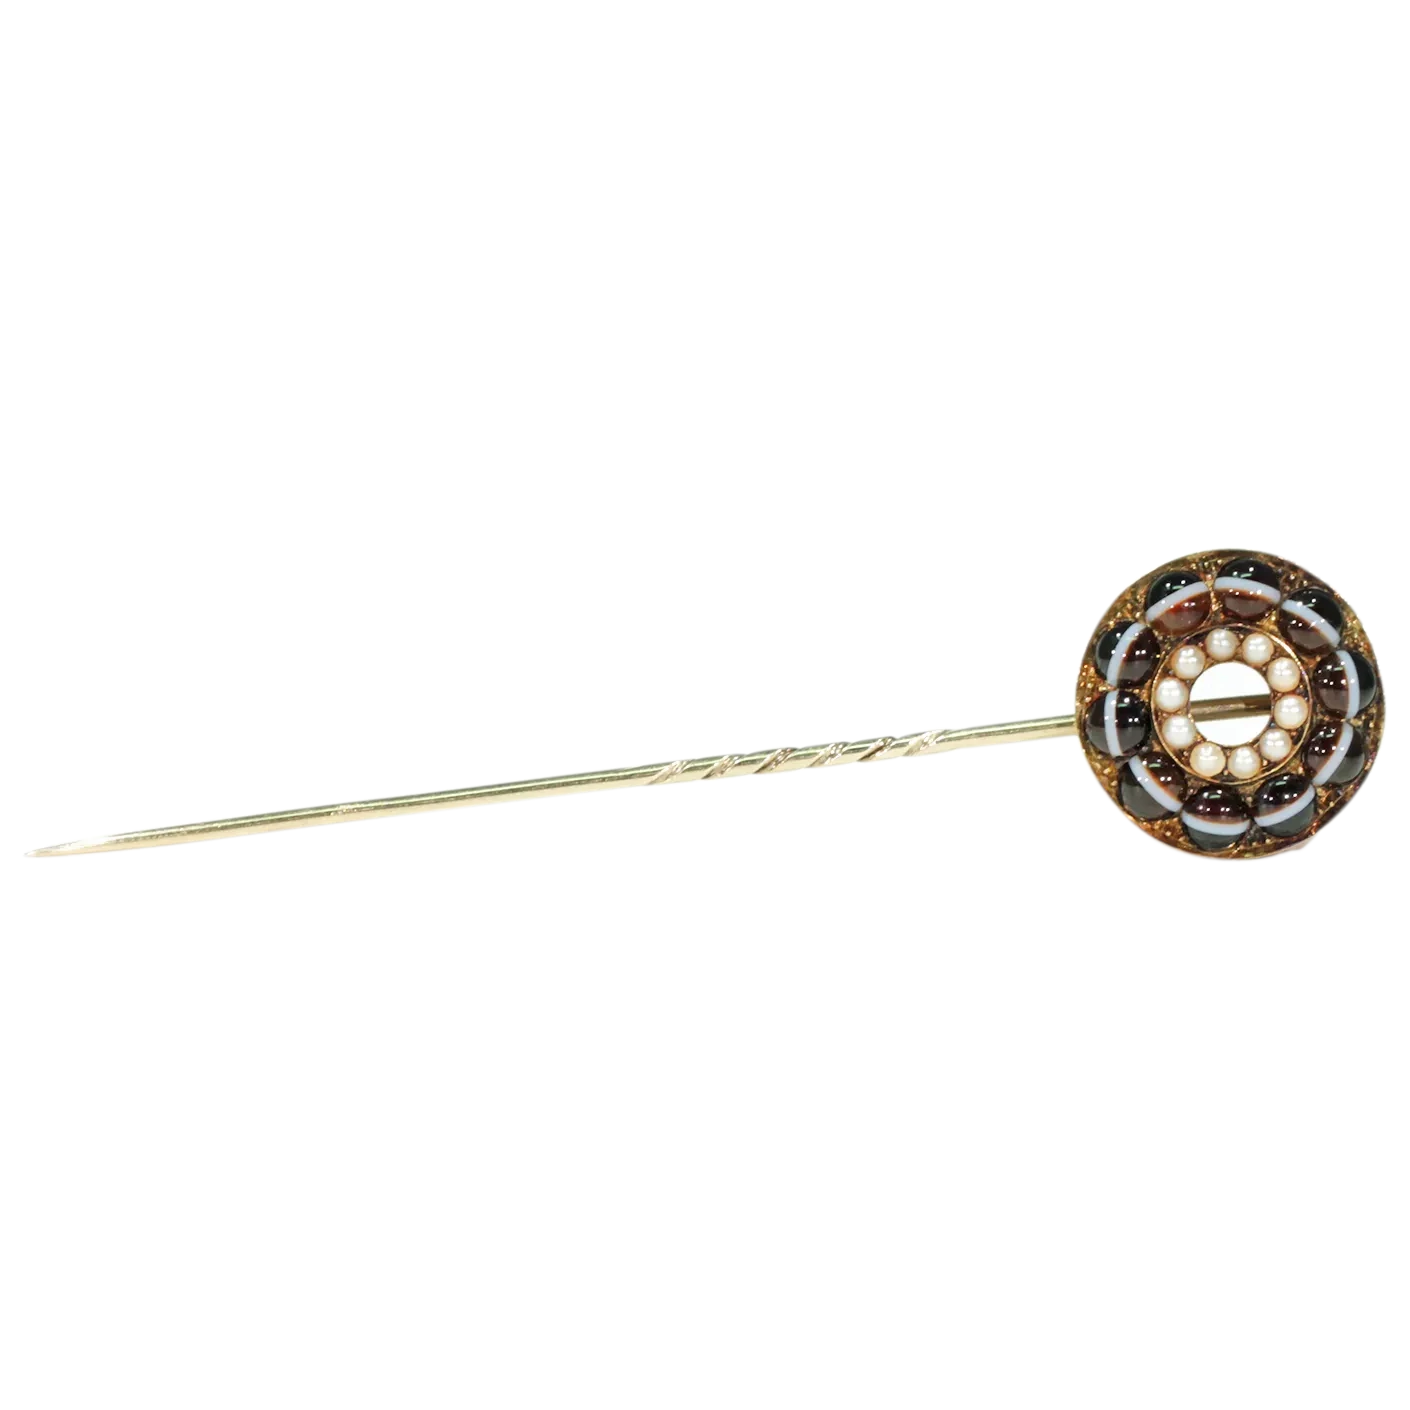 Antique Victorian Banded Agate Pearl Stick Pin